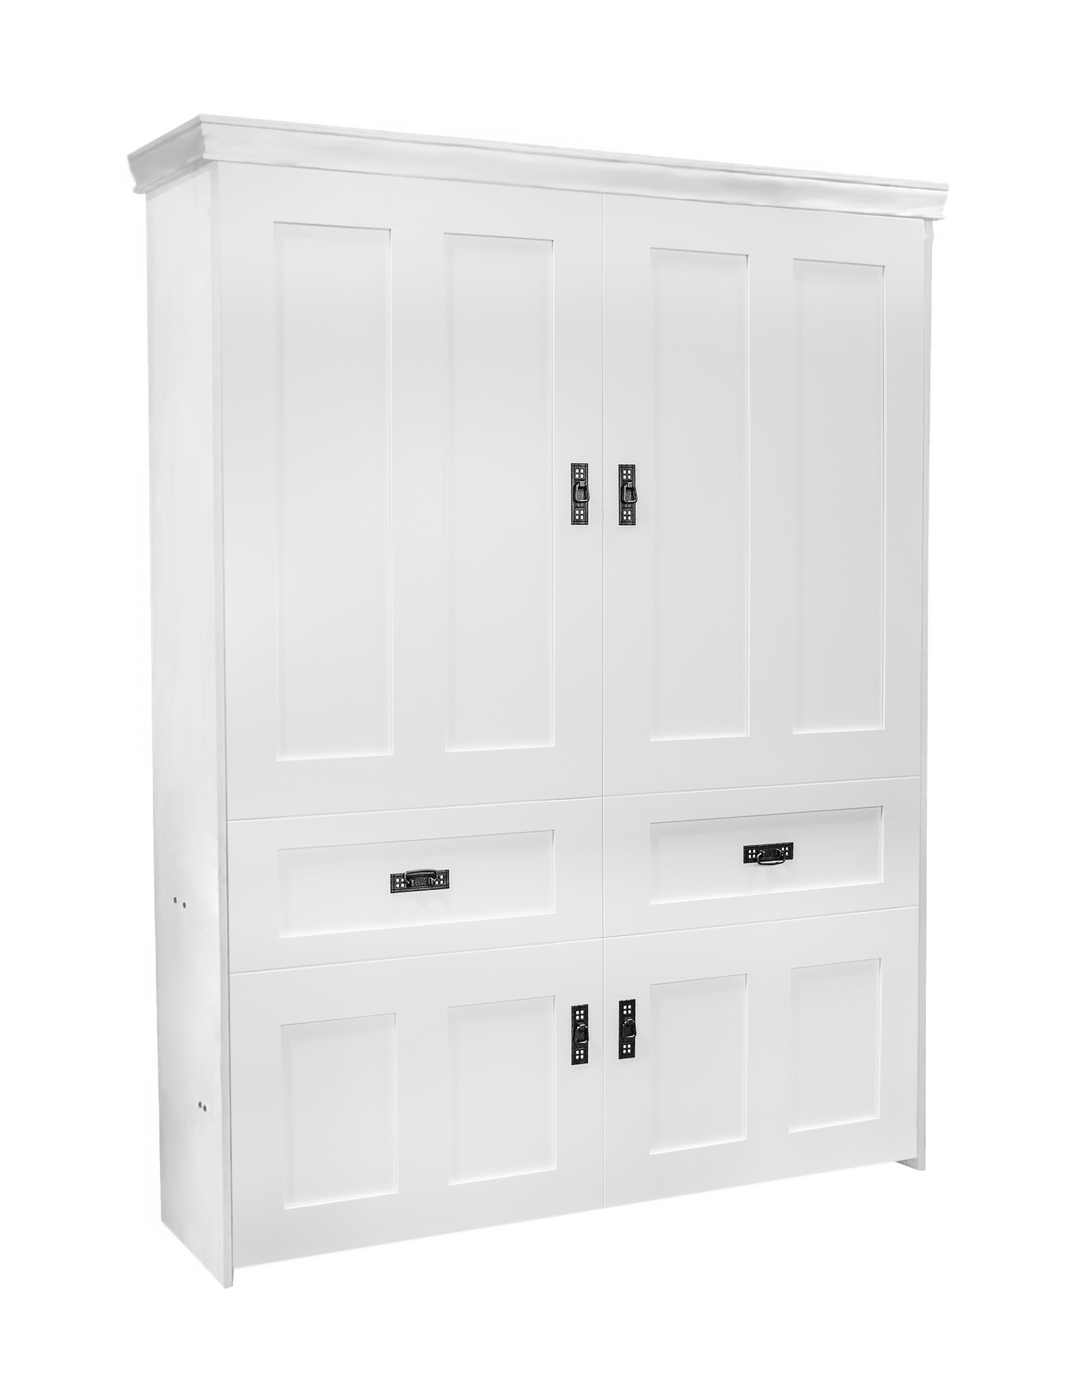 Mission Face Murphy Bed Vertical Queen Maple Painted White Discounted